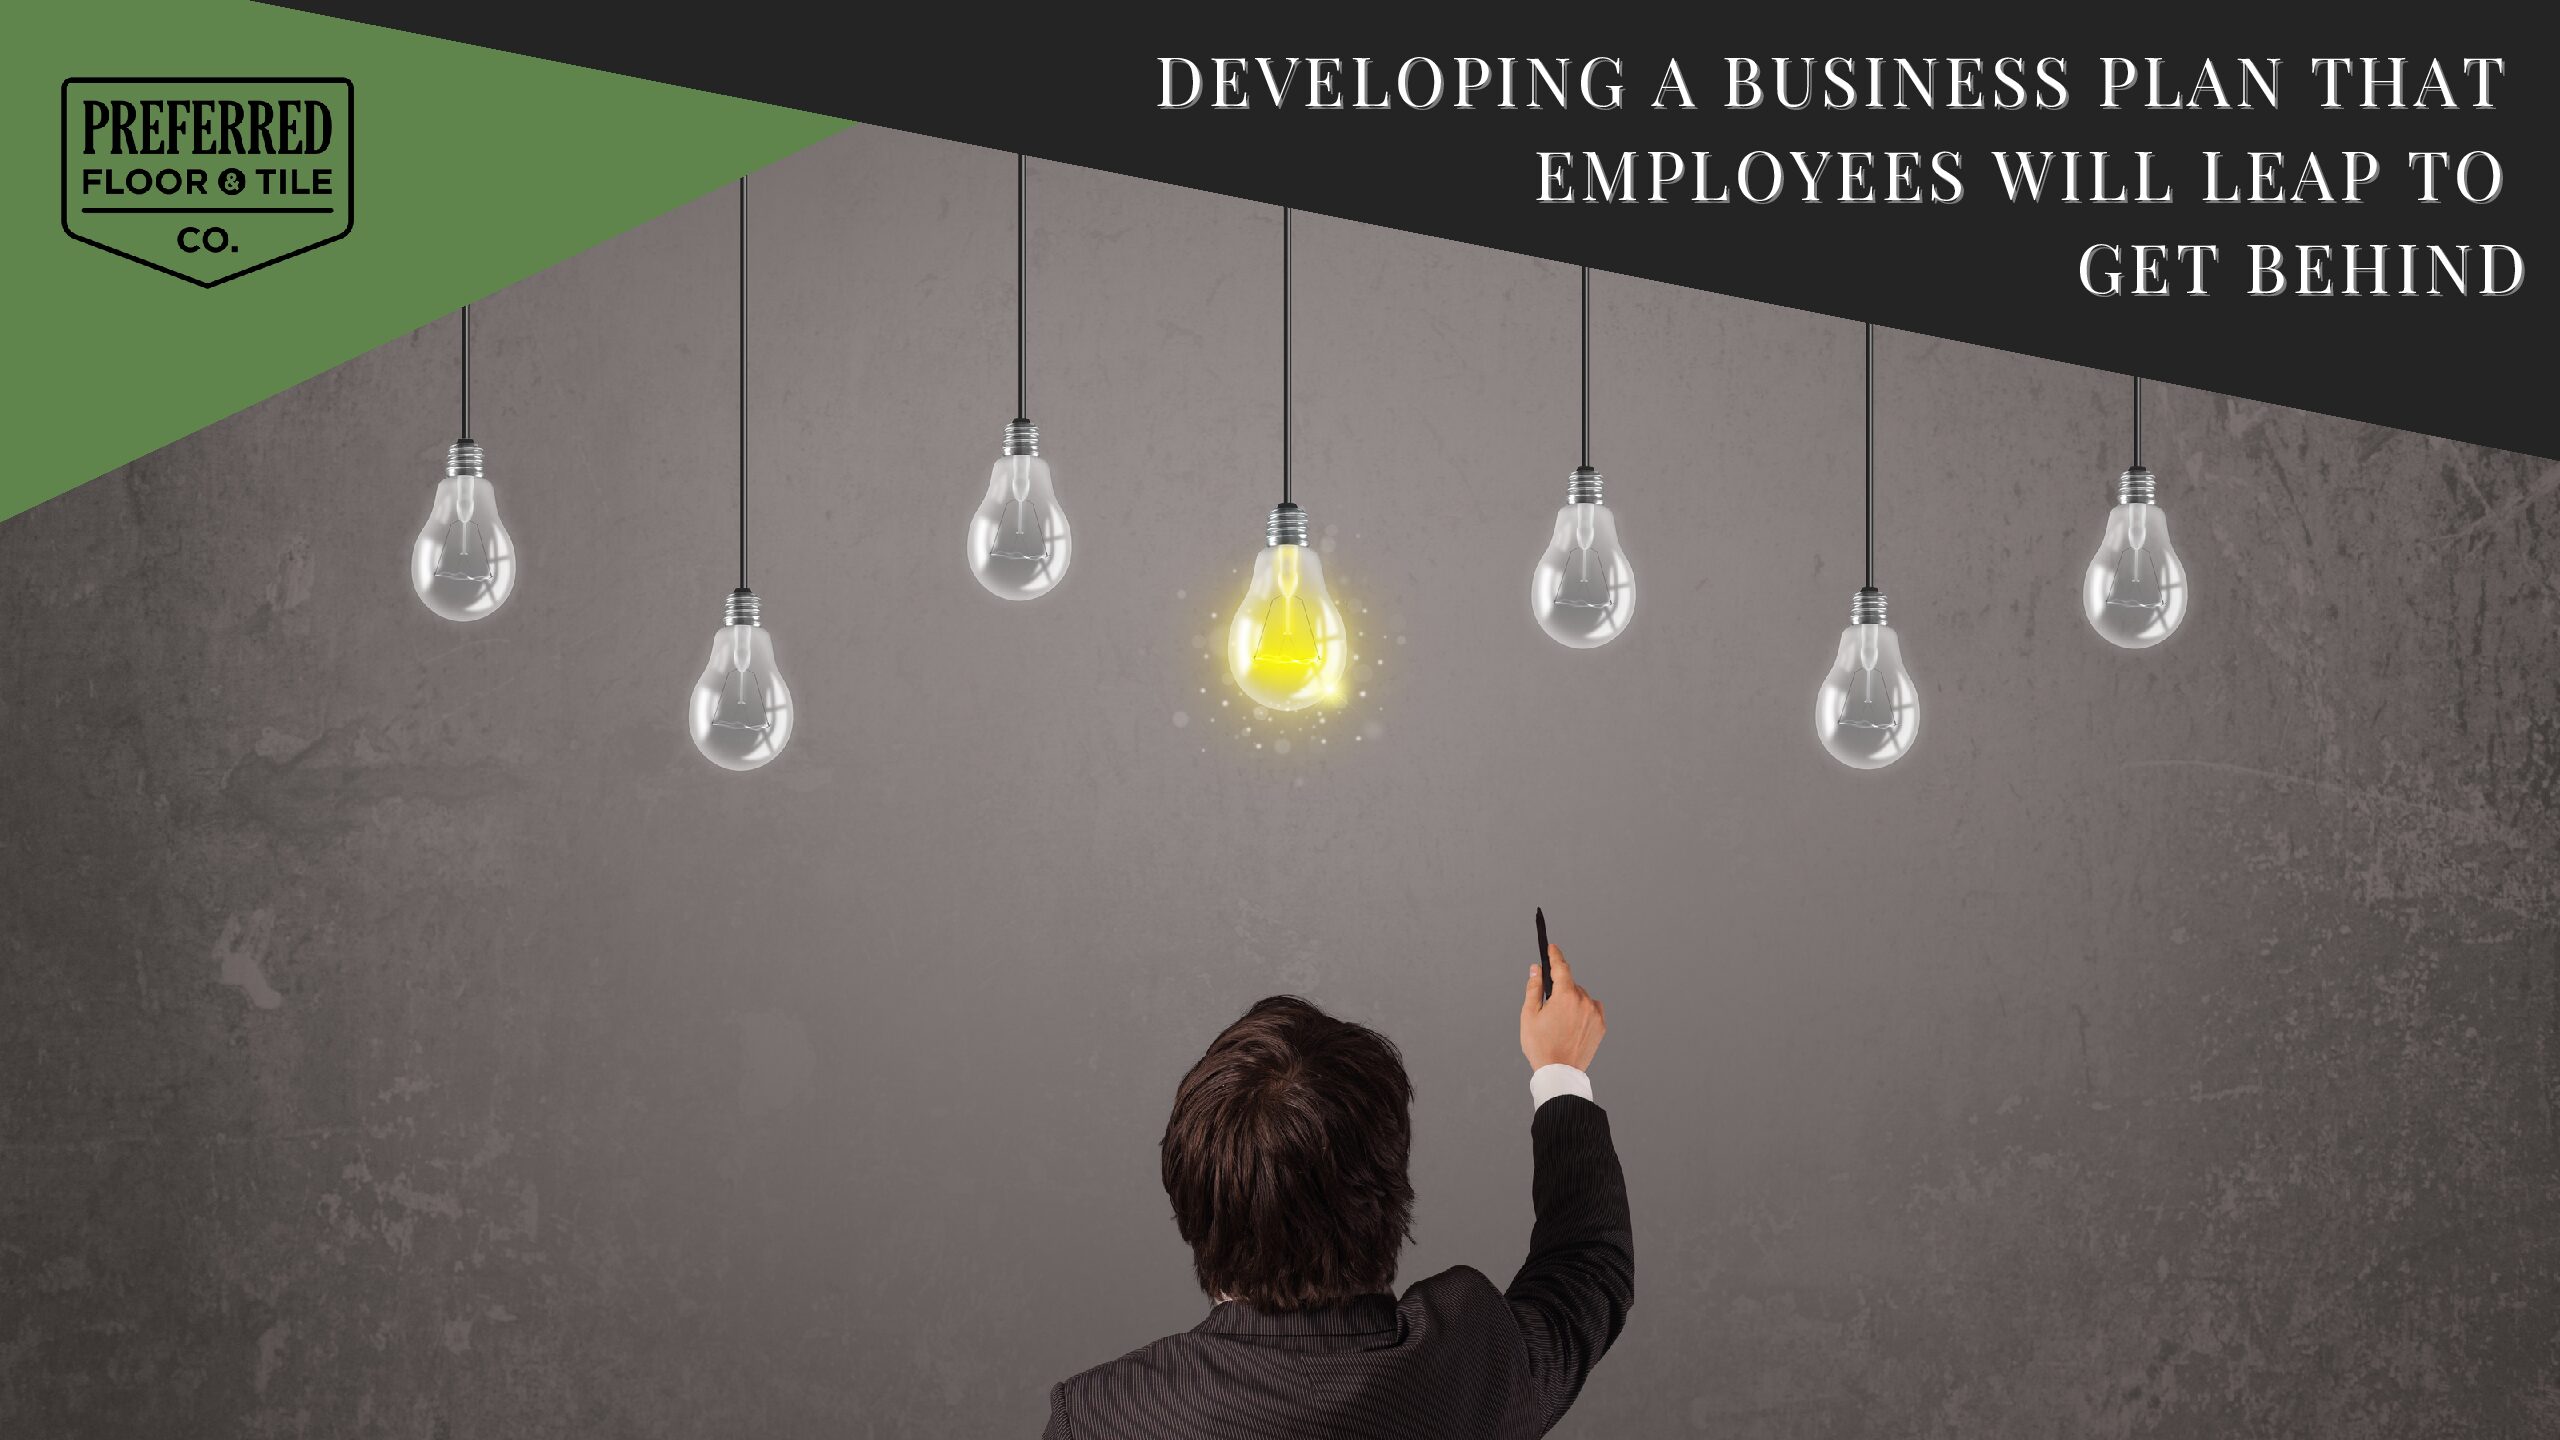 Developing a Business Plan That Employees Will Leap To Get Behind